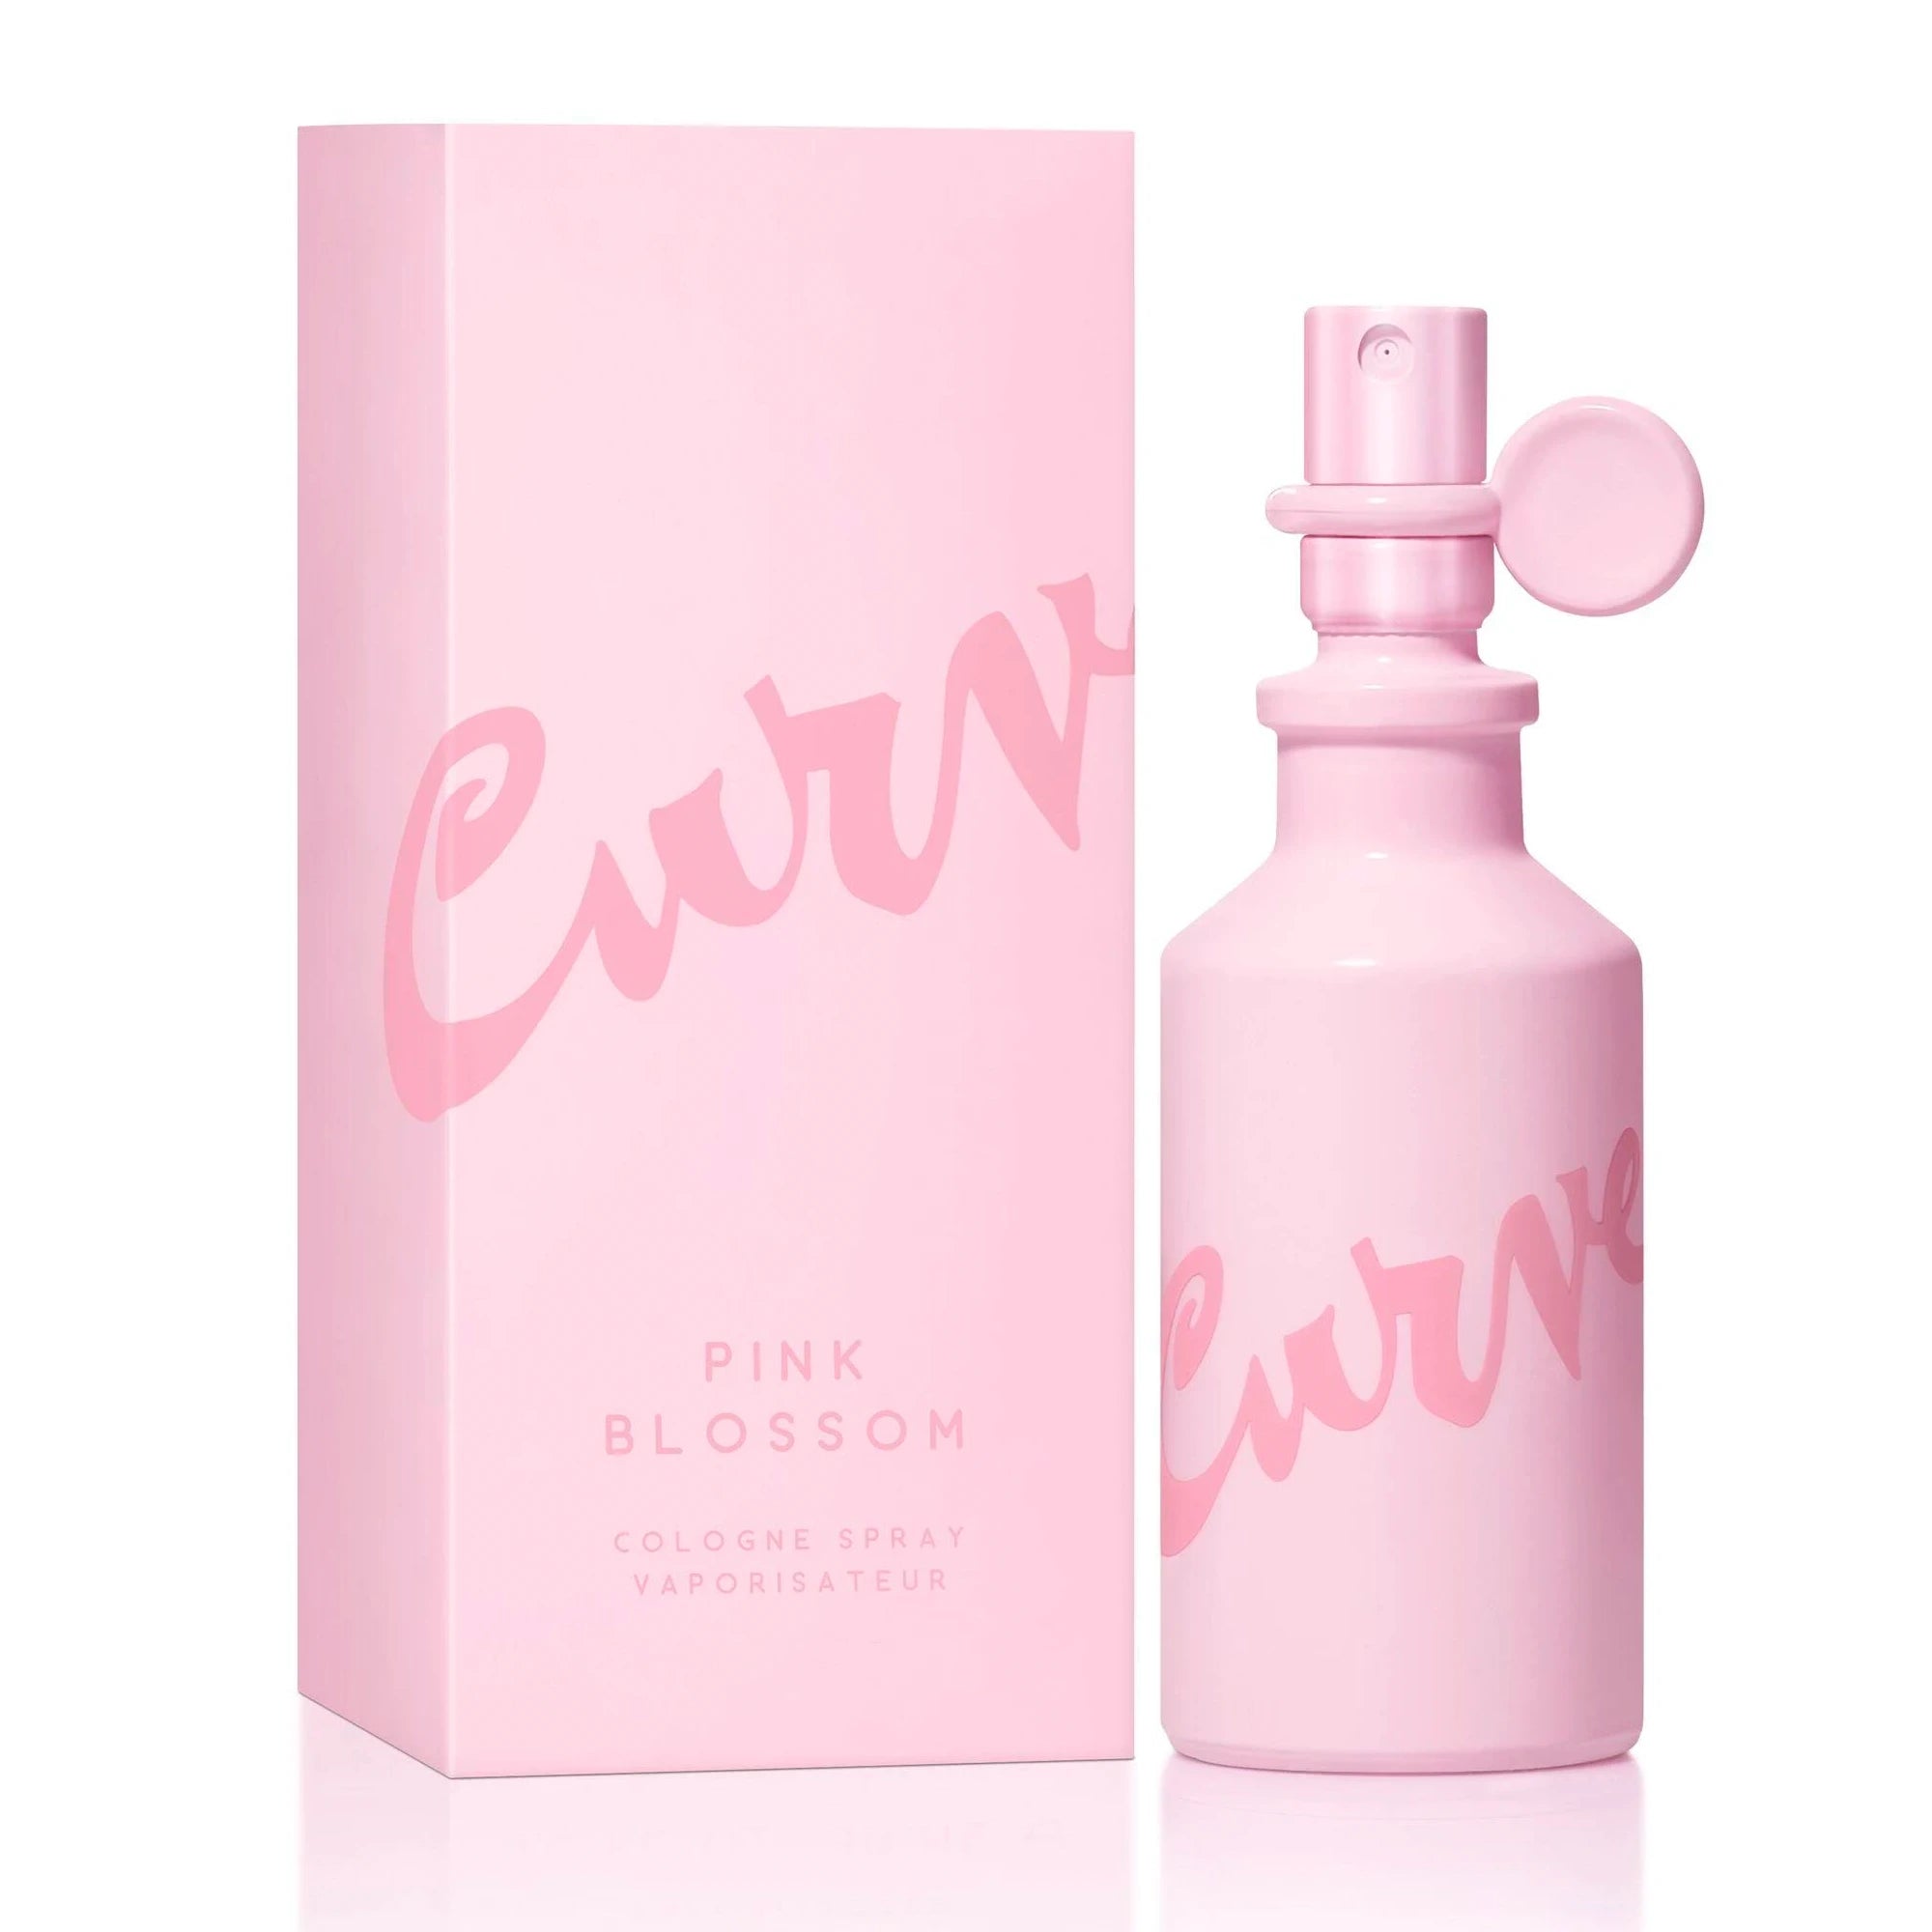 <p>Curve Pink Blossom Eau De Toilette is an exquisite embodiment of dewy femininity. Opening with delicate notes of pink apple blossom, followed by water lily and finished with vibrant pink peonies, this luxurious scent will bestow you with a confidence-inspiring radiance. Uplift your senses with this exquisite fragrance and be enraptured in its pink floral bliss.</p>